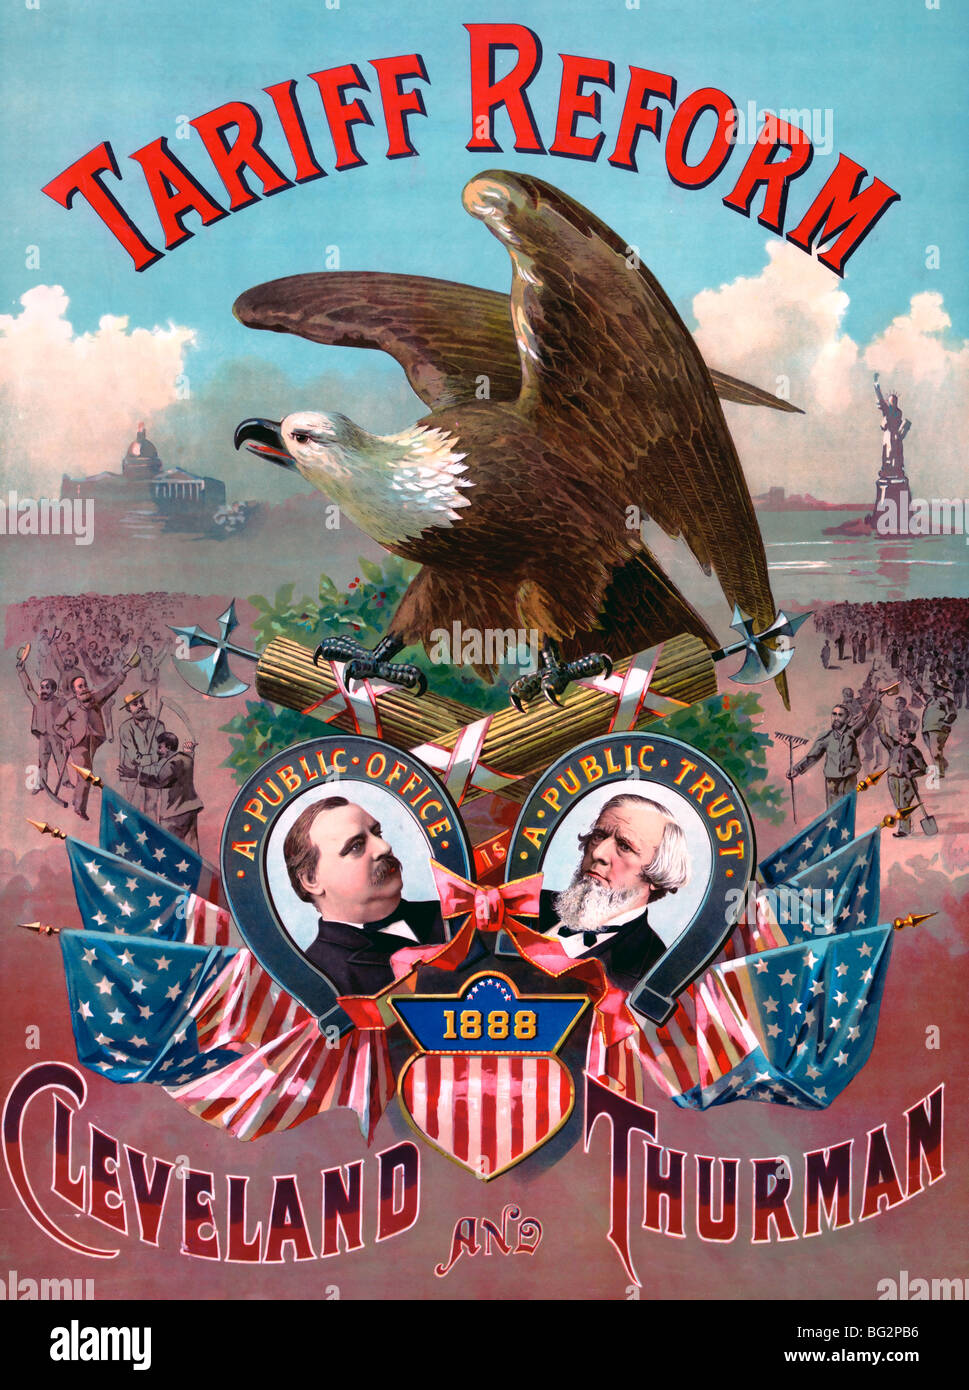 Tariff reform. Cleveland and Thurman - Campaign Poster for 1888 USA Presidential Election Stock Photo